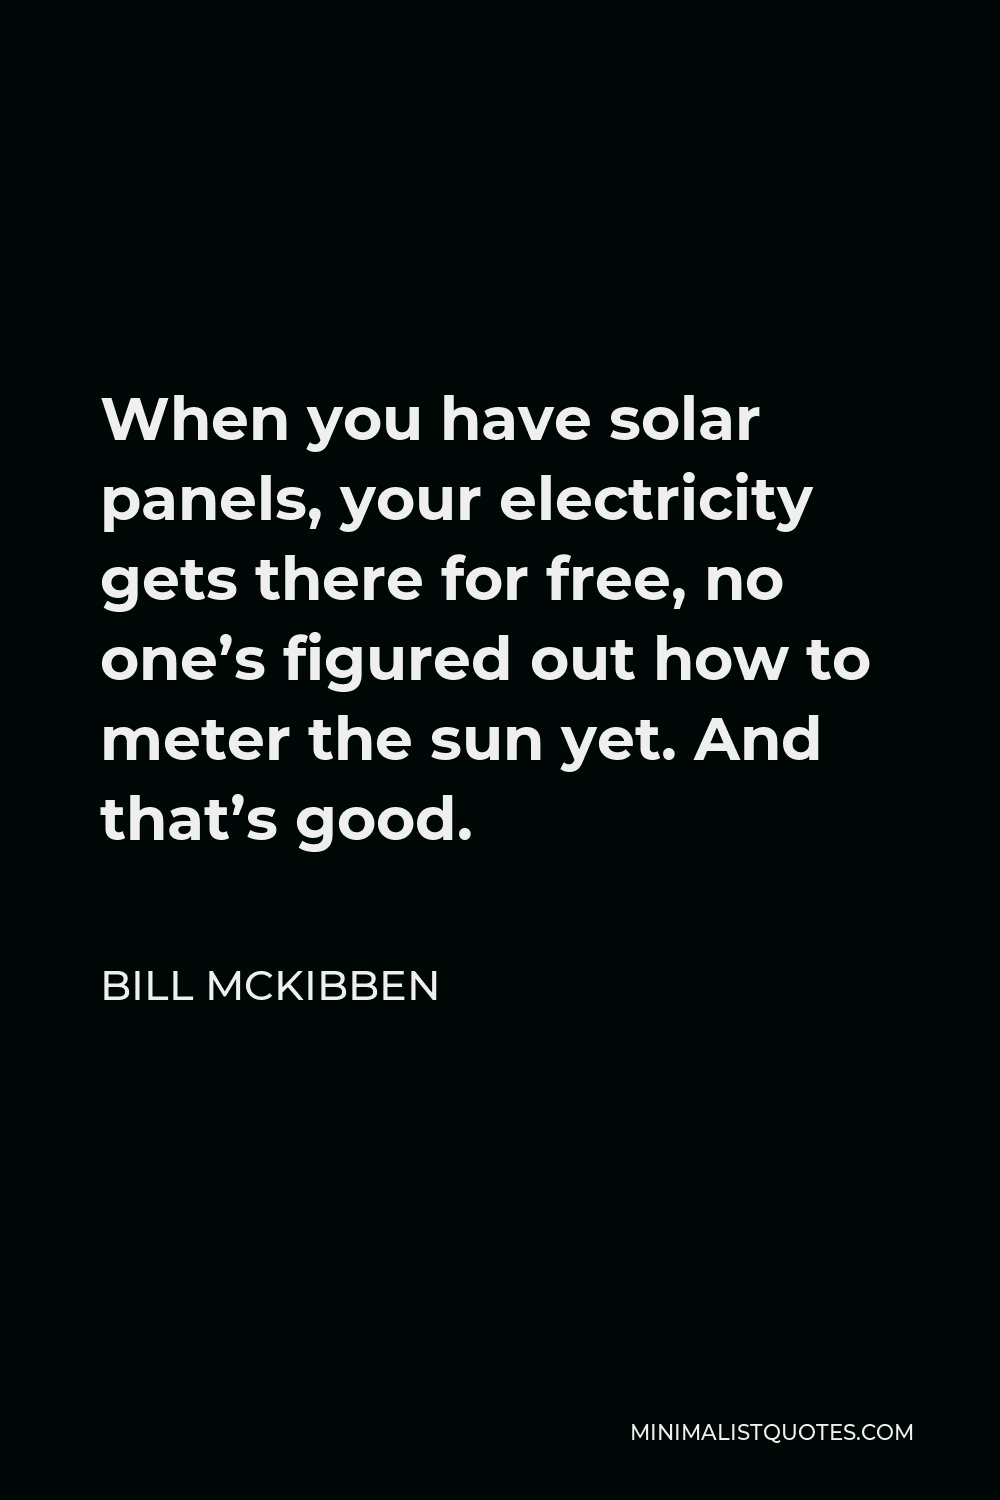 Bill McKibben Quote - When you have solar panels, your electricity gets there for free, no one’s figured out how to meter the sun yet. And that’s good.